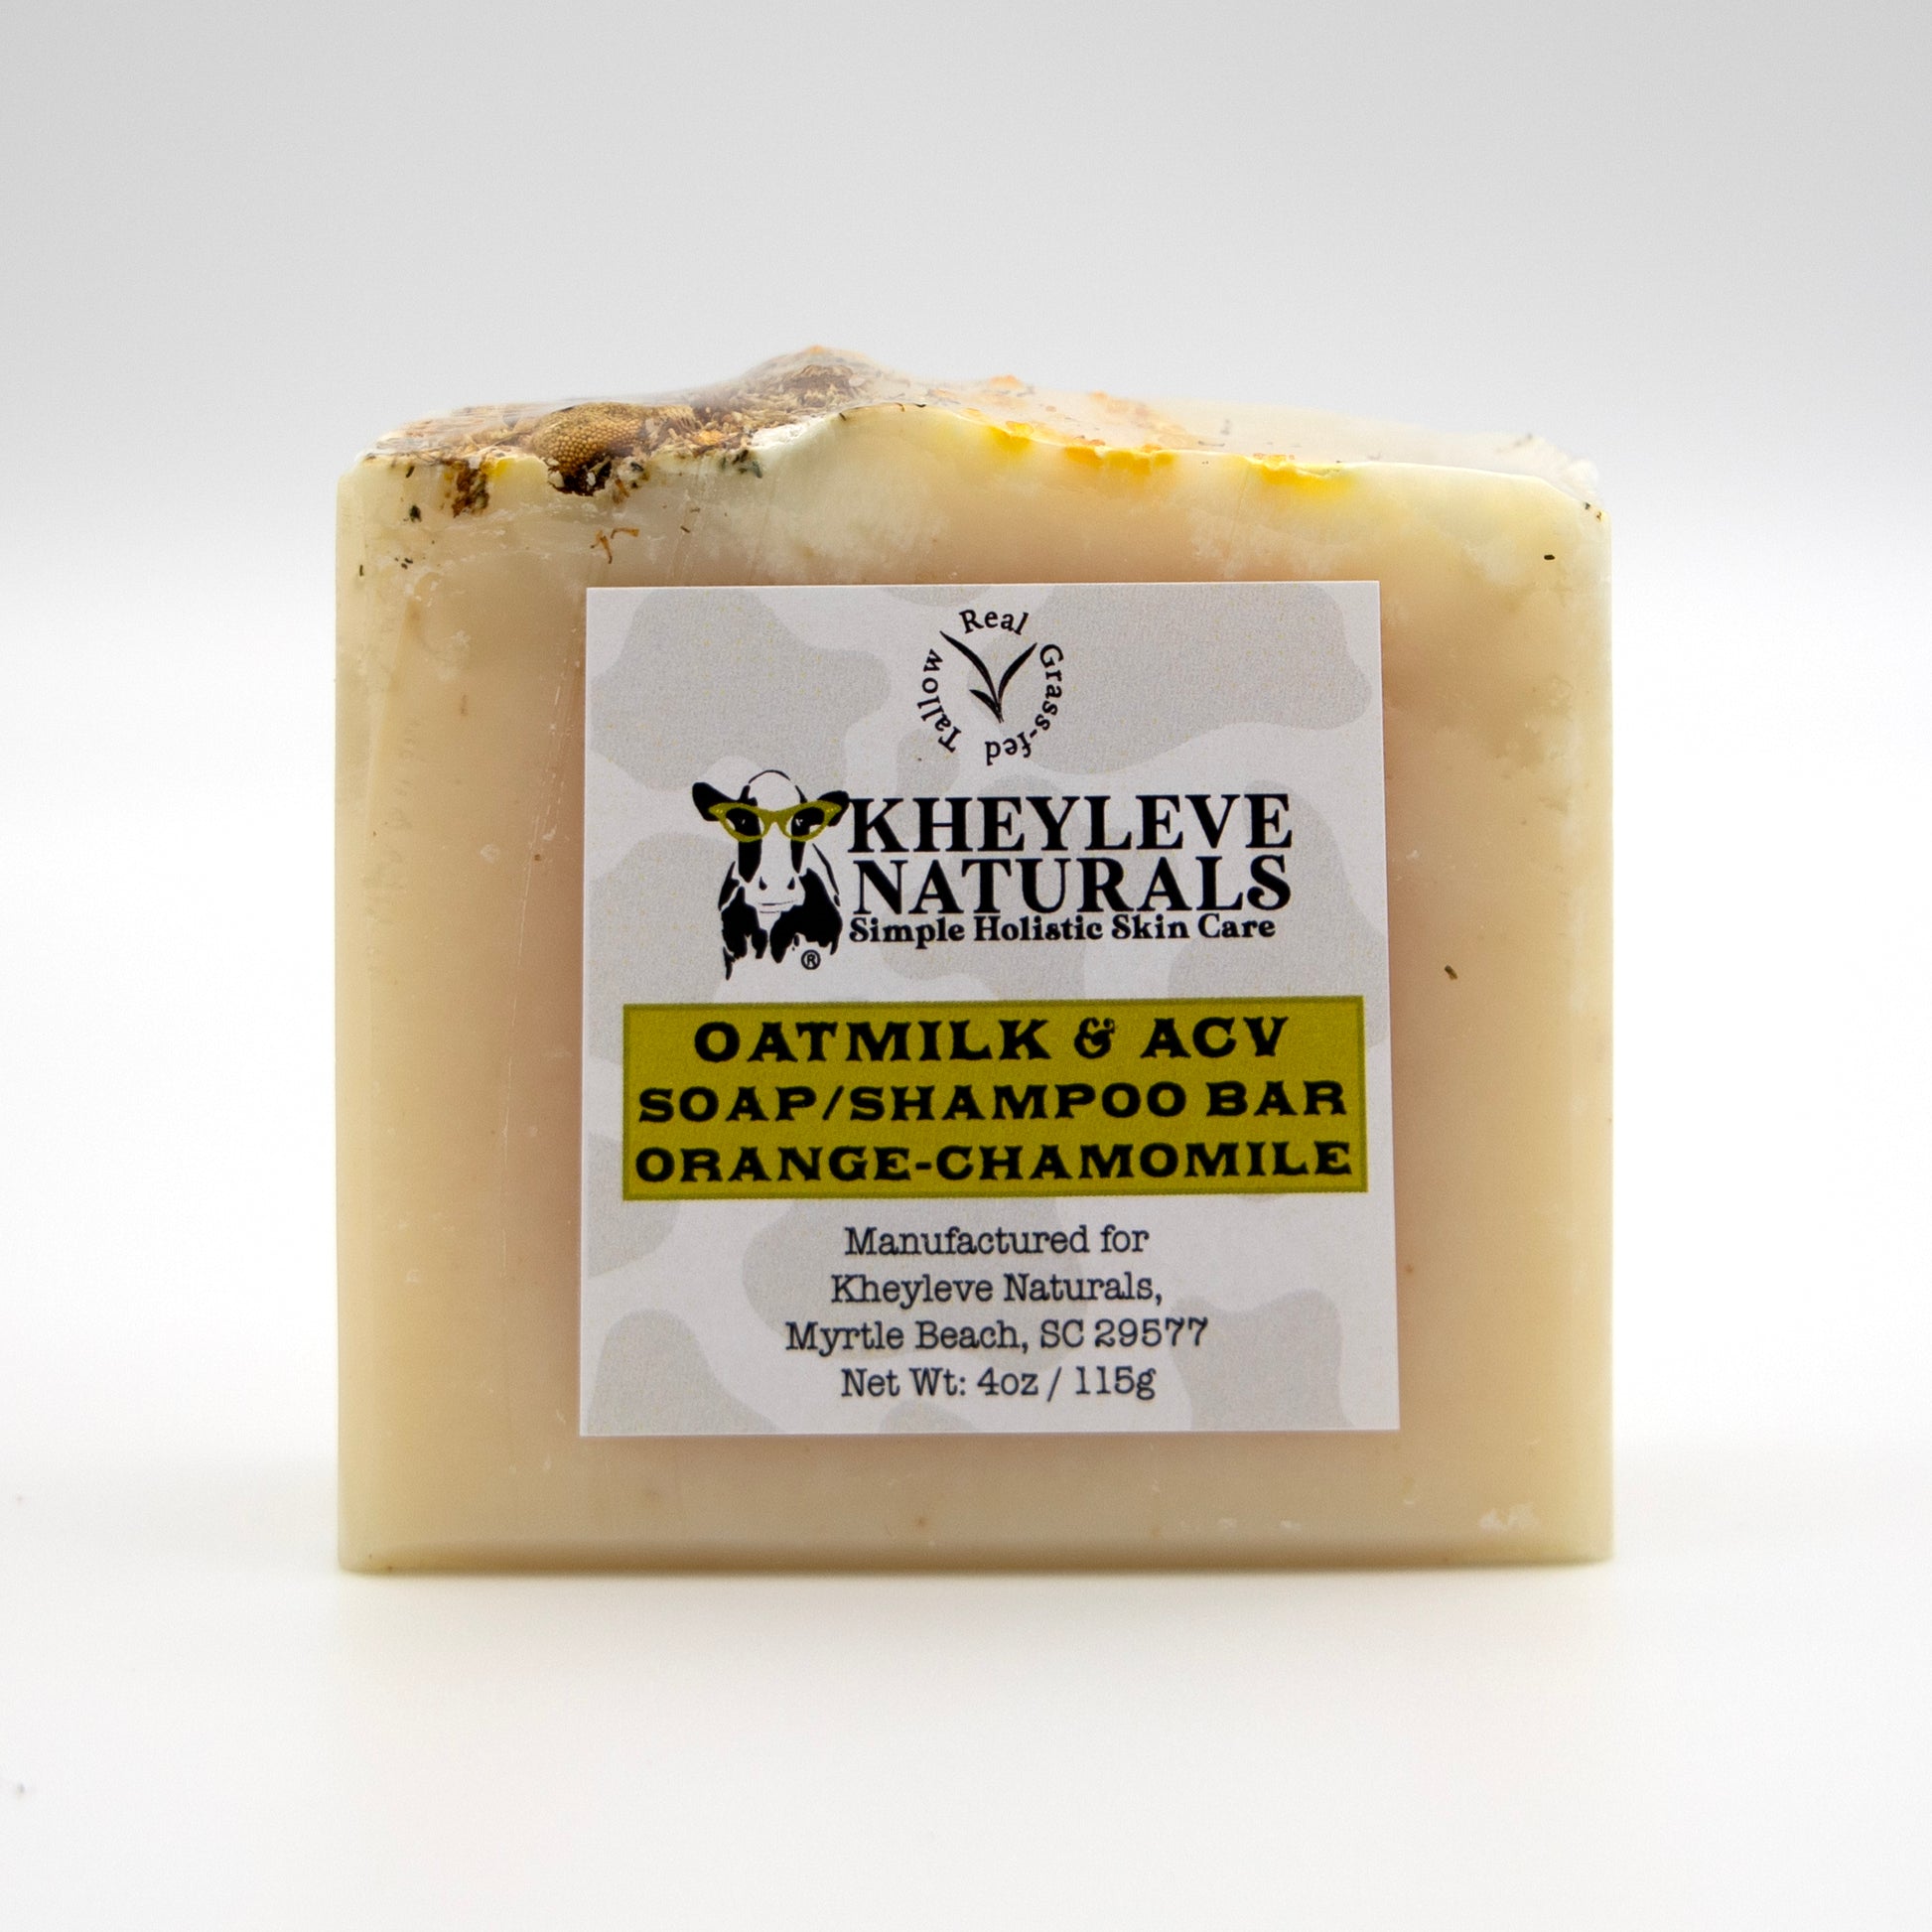 This all natural  Shampoo/ Soap bar is packed with the soothing power of chamomile and the refreshing zing of orange. Revive your hair with the natural, vinegar-infused chamomile formula, perfect for sensitive scalps.